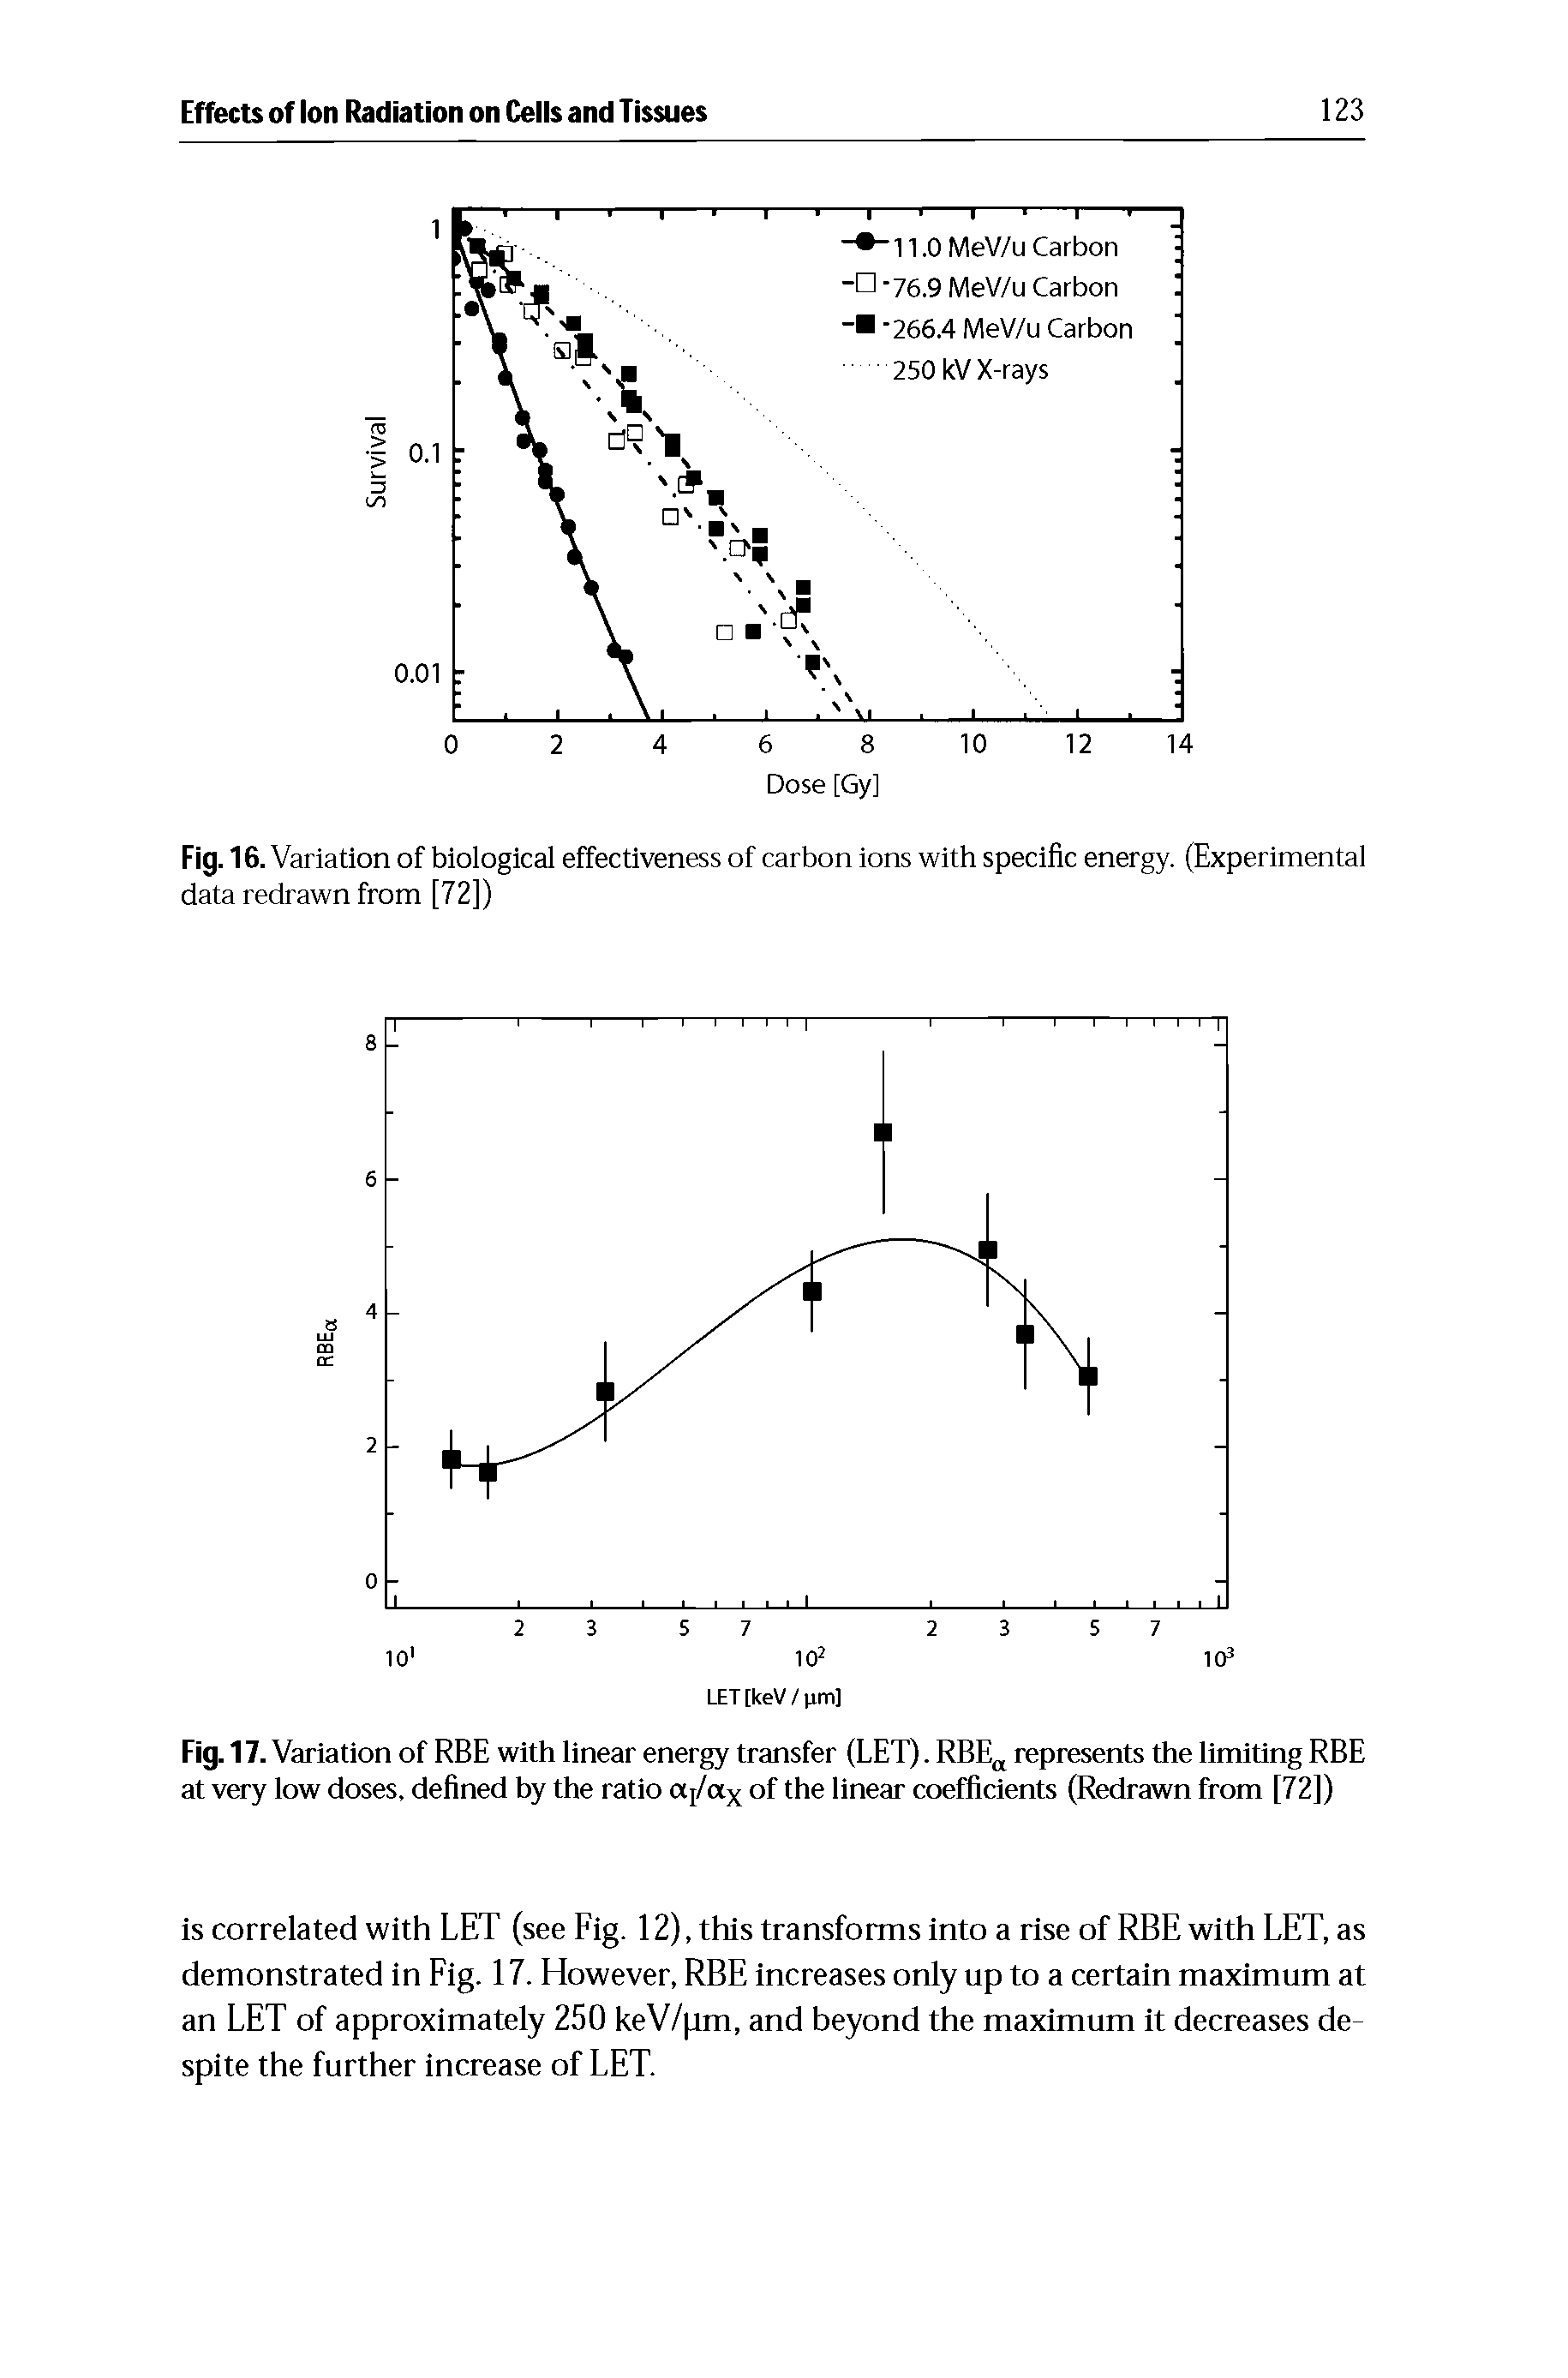 Fig. 17. Variation of RBE with linear energy transfer (LET). RBE represents the limiting RBE at very low doses, defined by the ratio (Xj/ax of the linear coefficients (Redrawn from [72])...